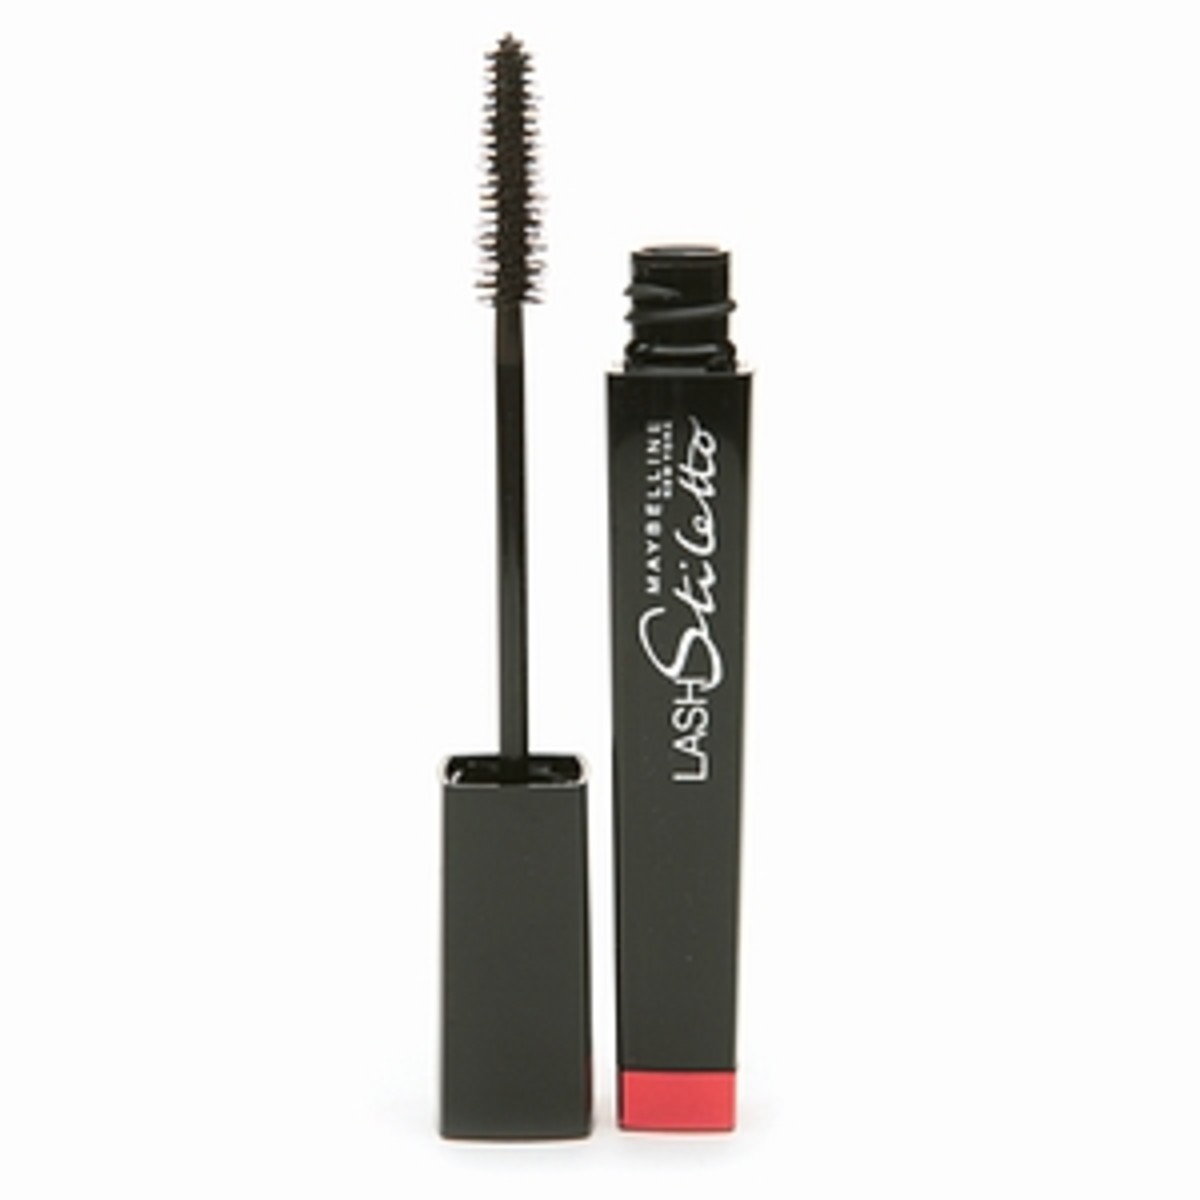 Maybelline Lash Stiletto was our pick for the best lengthening mascara.